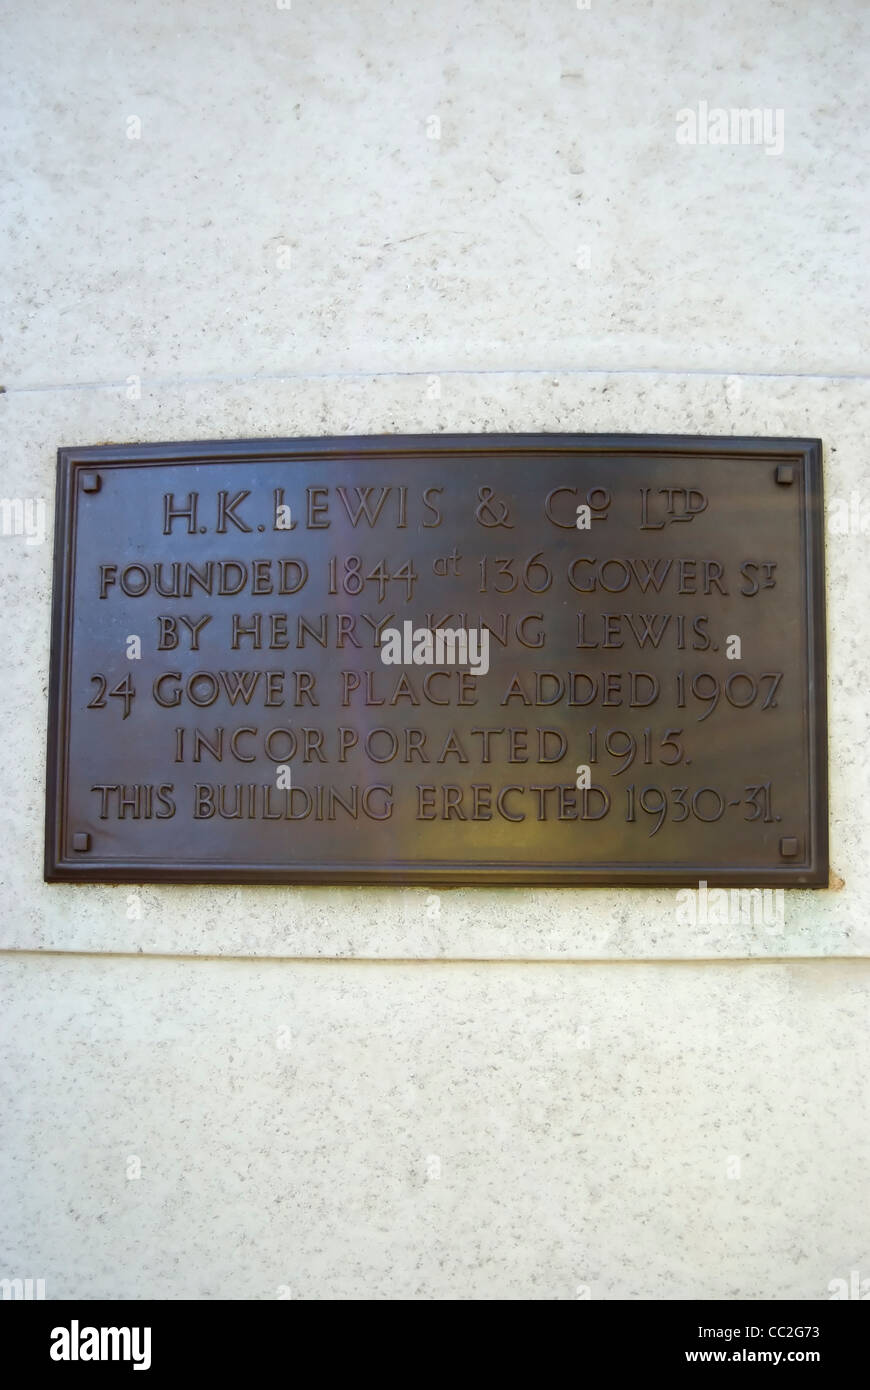 plaque marking the former site of h.k.lewis, a noted medical bookshop on gower street, london, england Stock Photo